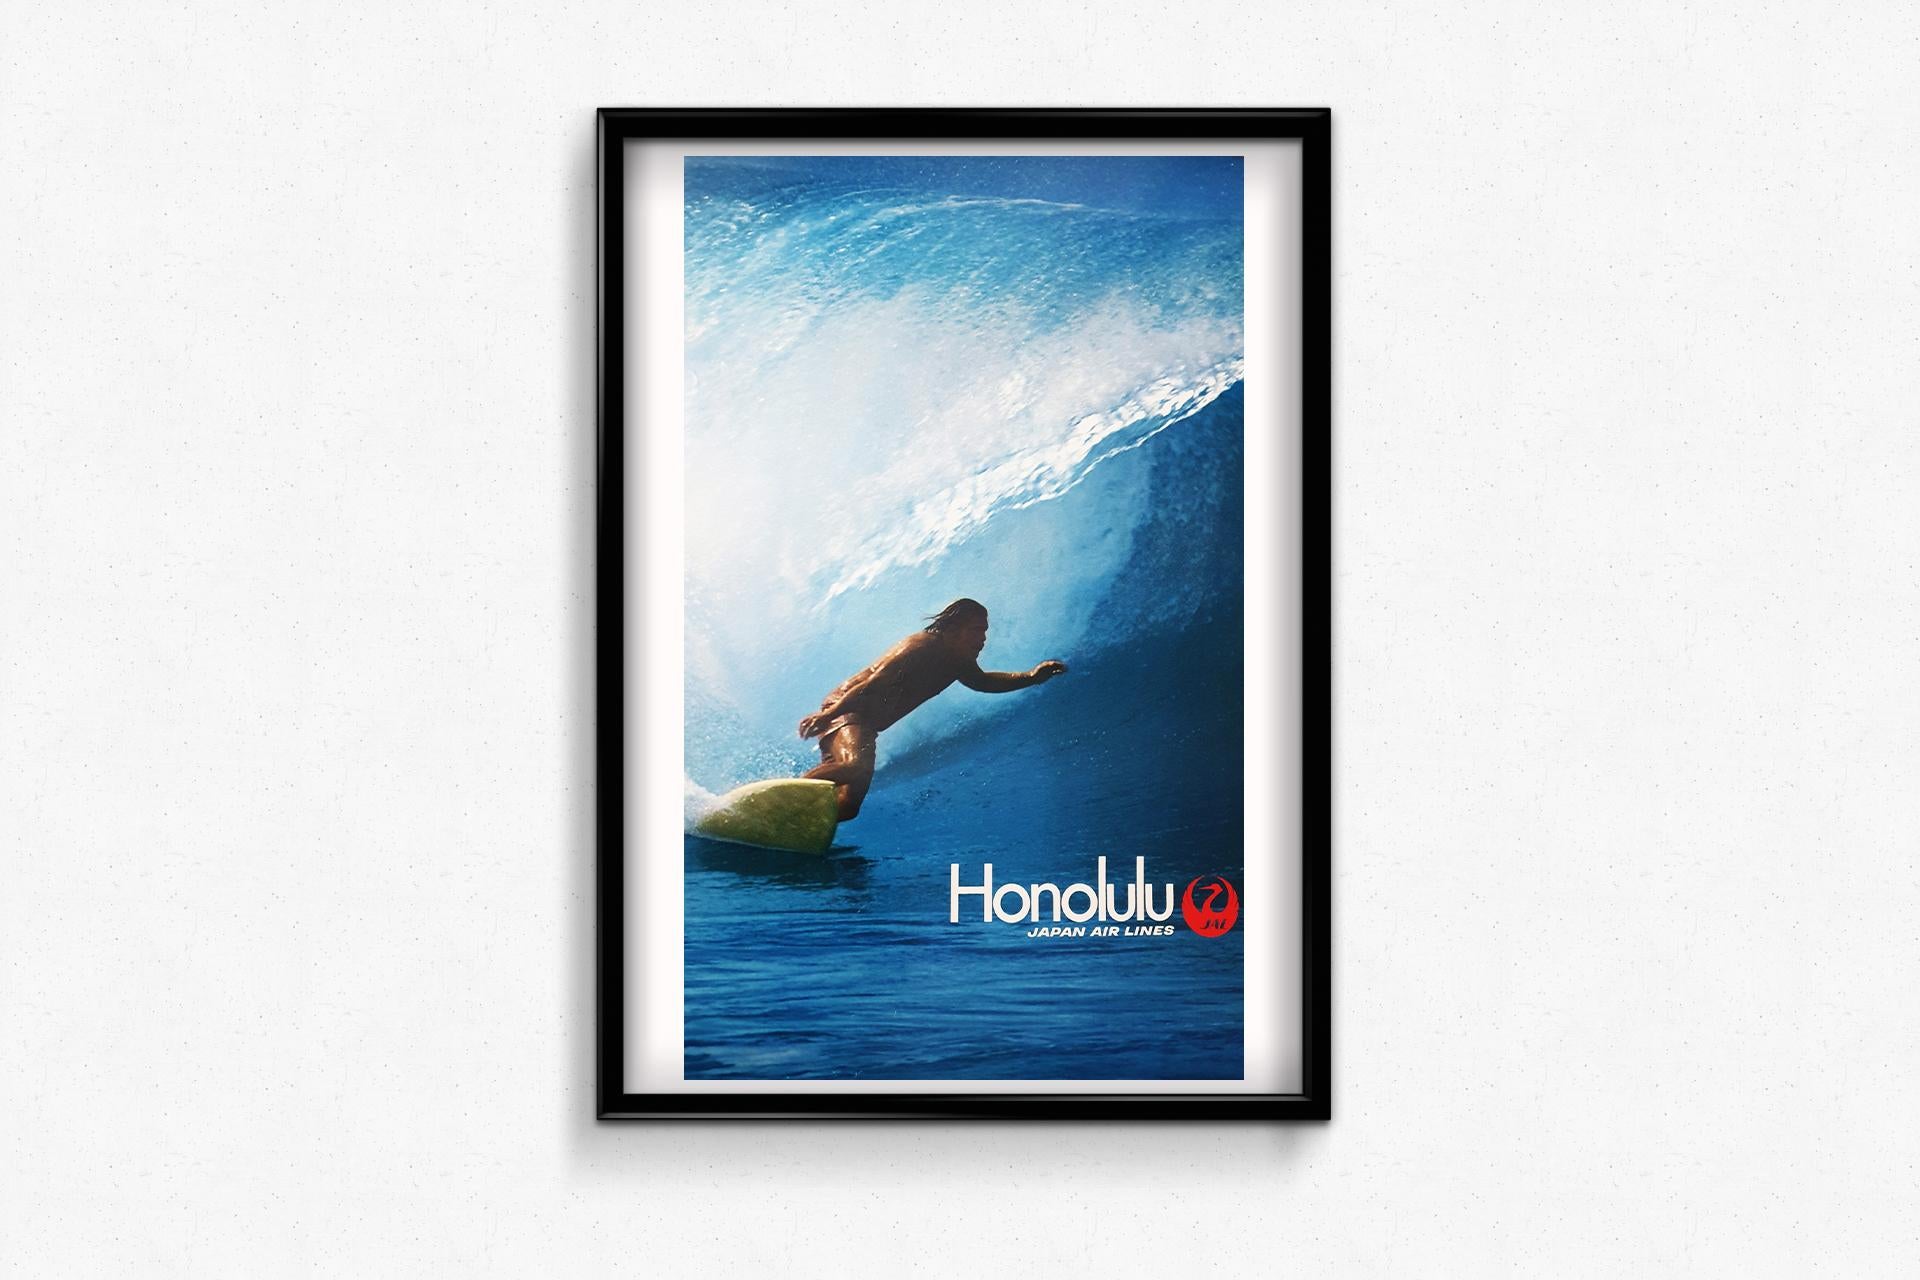 Original poster commissioned by Japan Airlines to promote its international flights. The Japanese national airline serves more than 100 destinations around the world.

This poster shows a surfer who has just performed a 